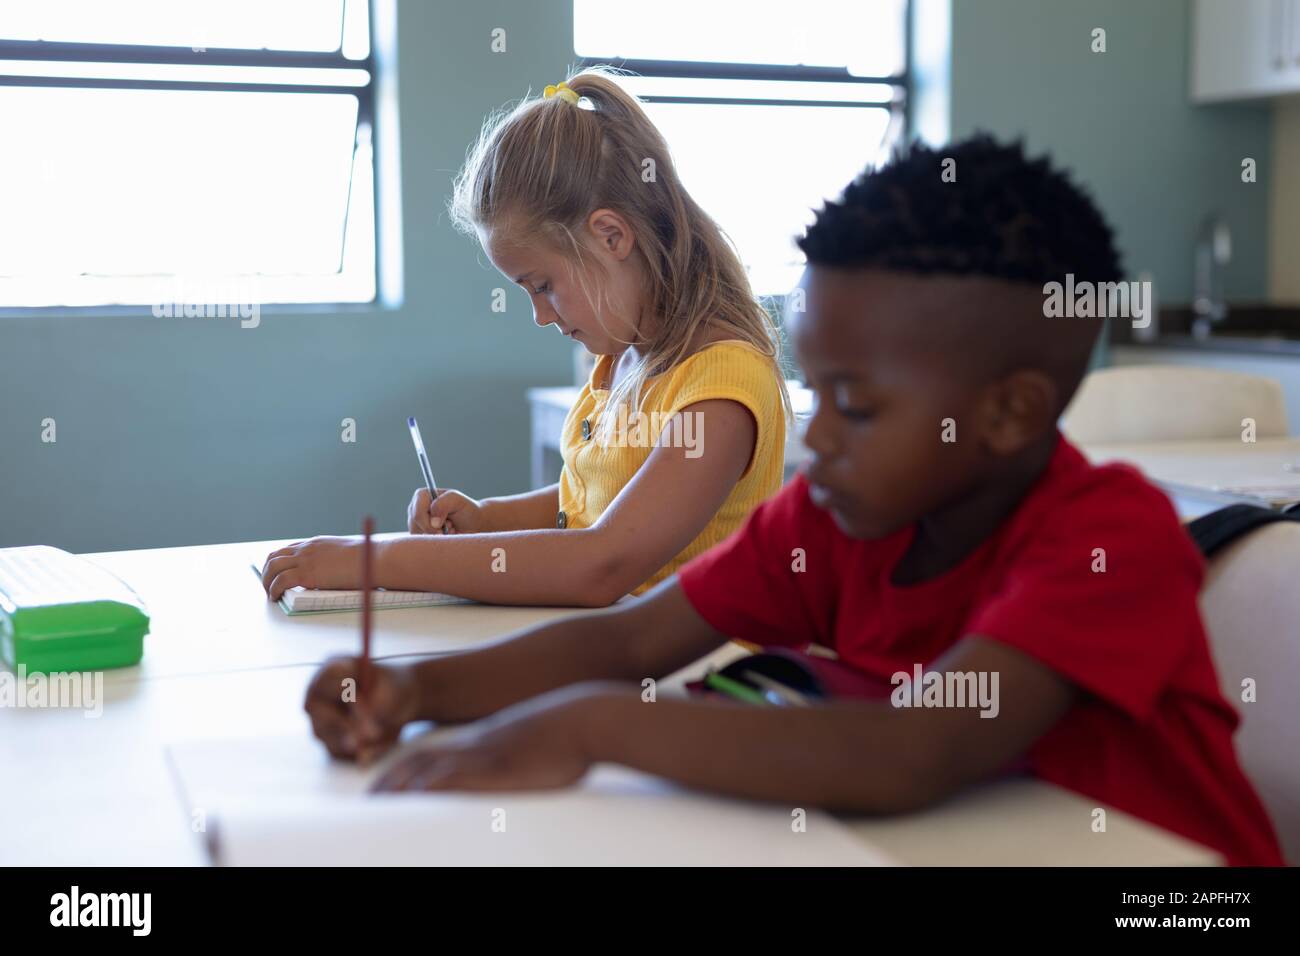 Schoolchildren writing during a lesson in an elementary school classroom Stock Photo